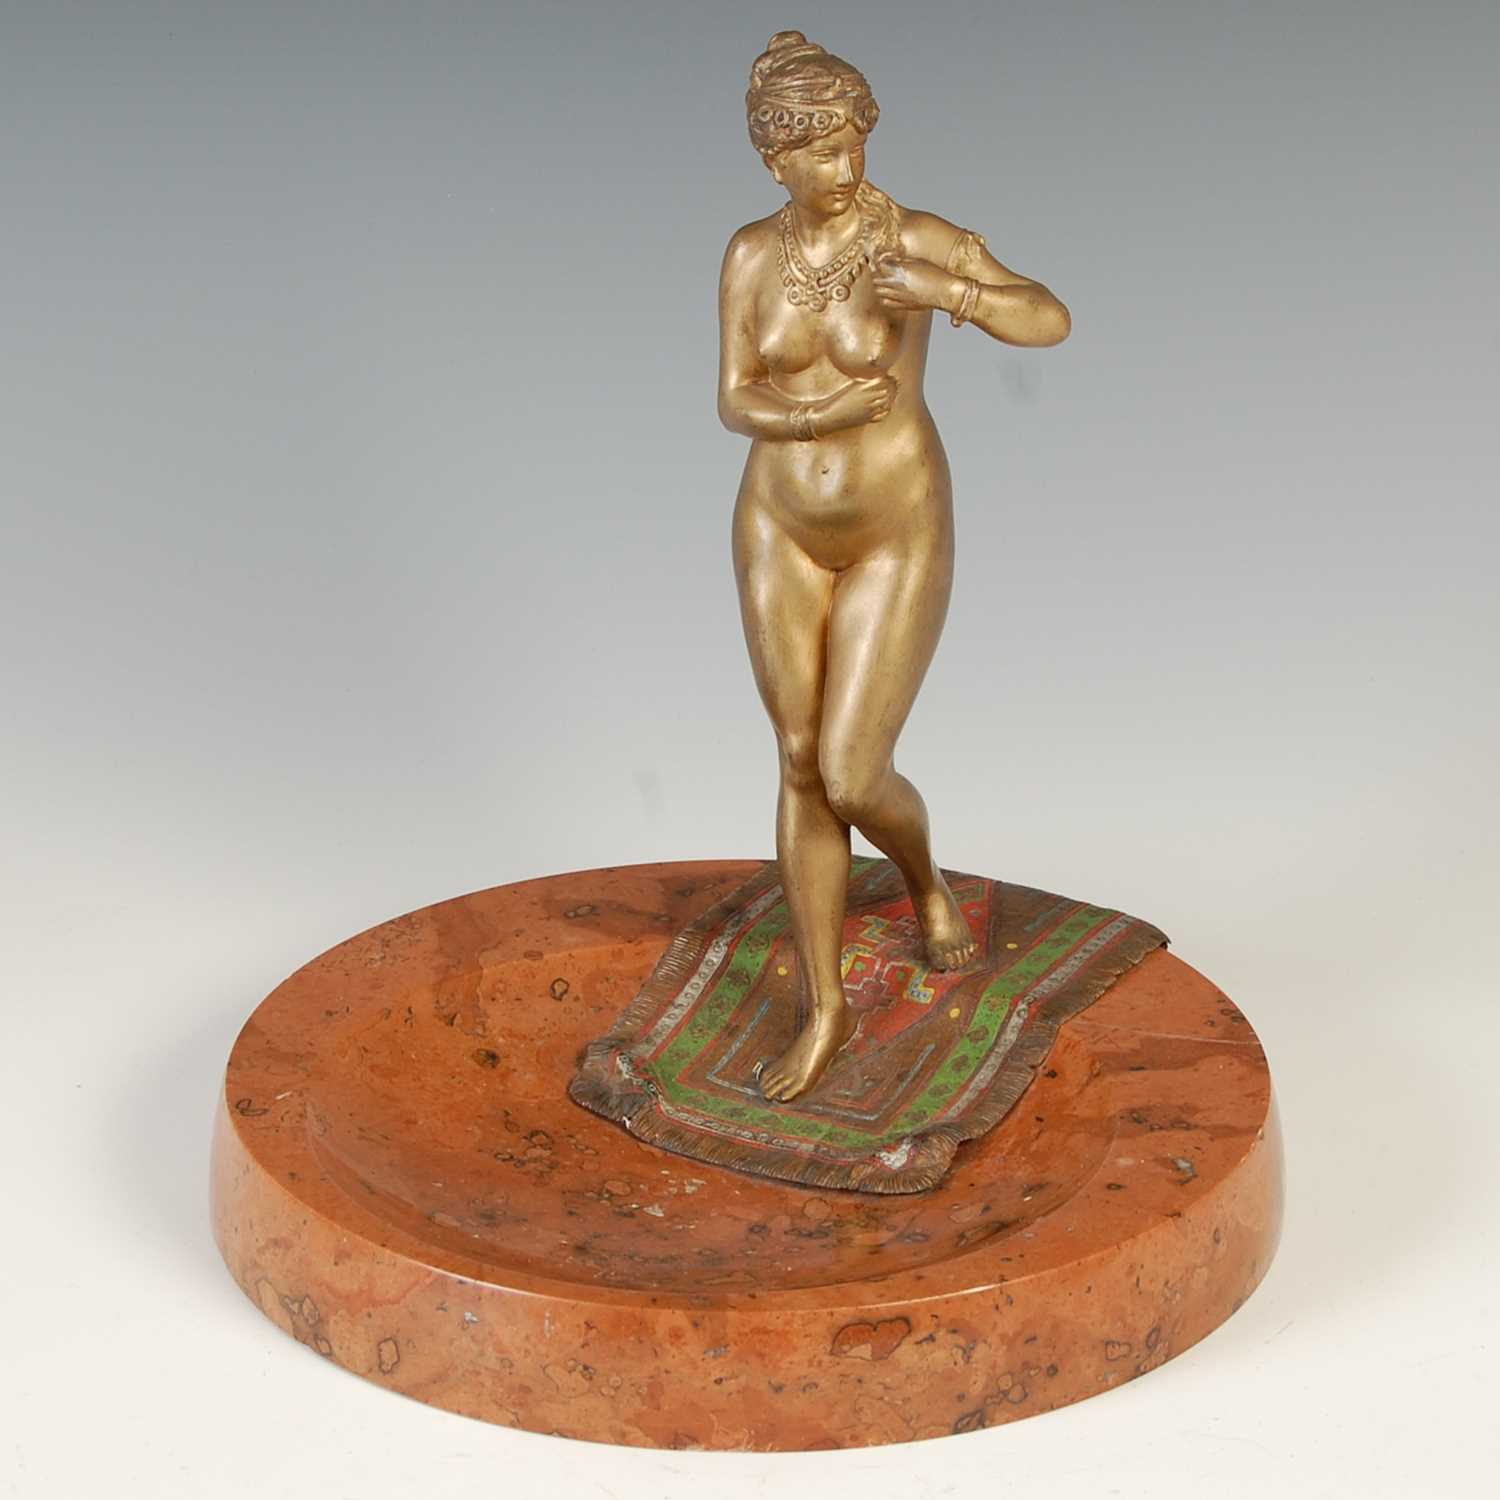 An early 20th century marble and bronze mounted cendrier, mounted with a cold-painted bronze